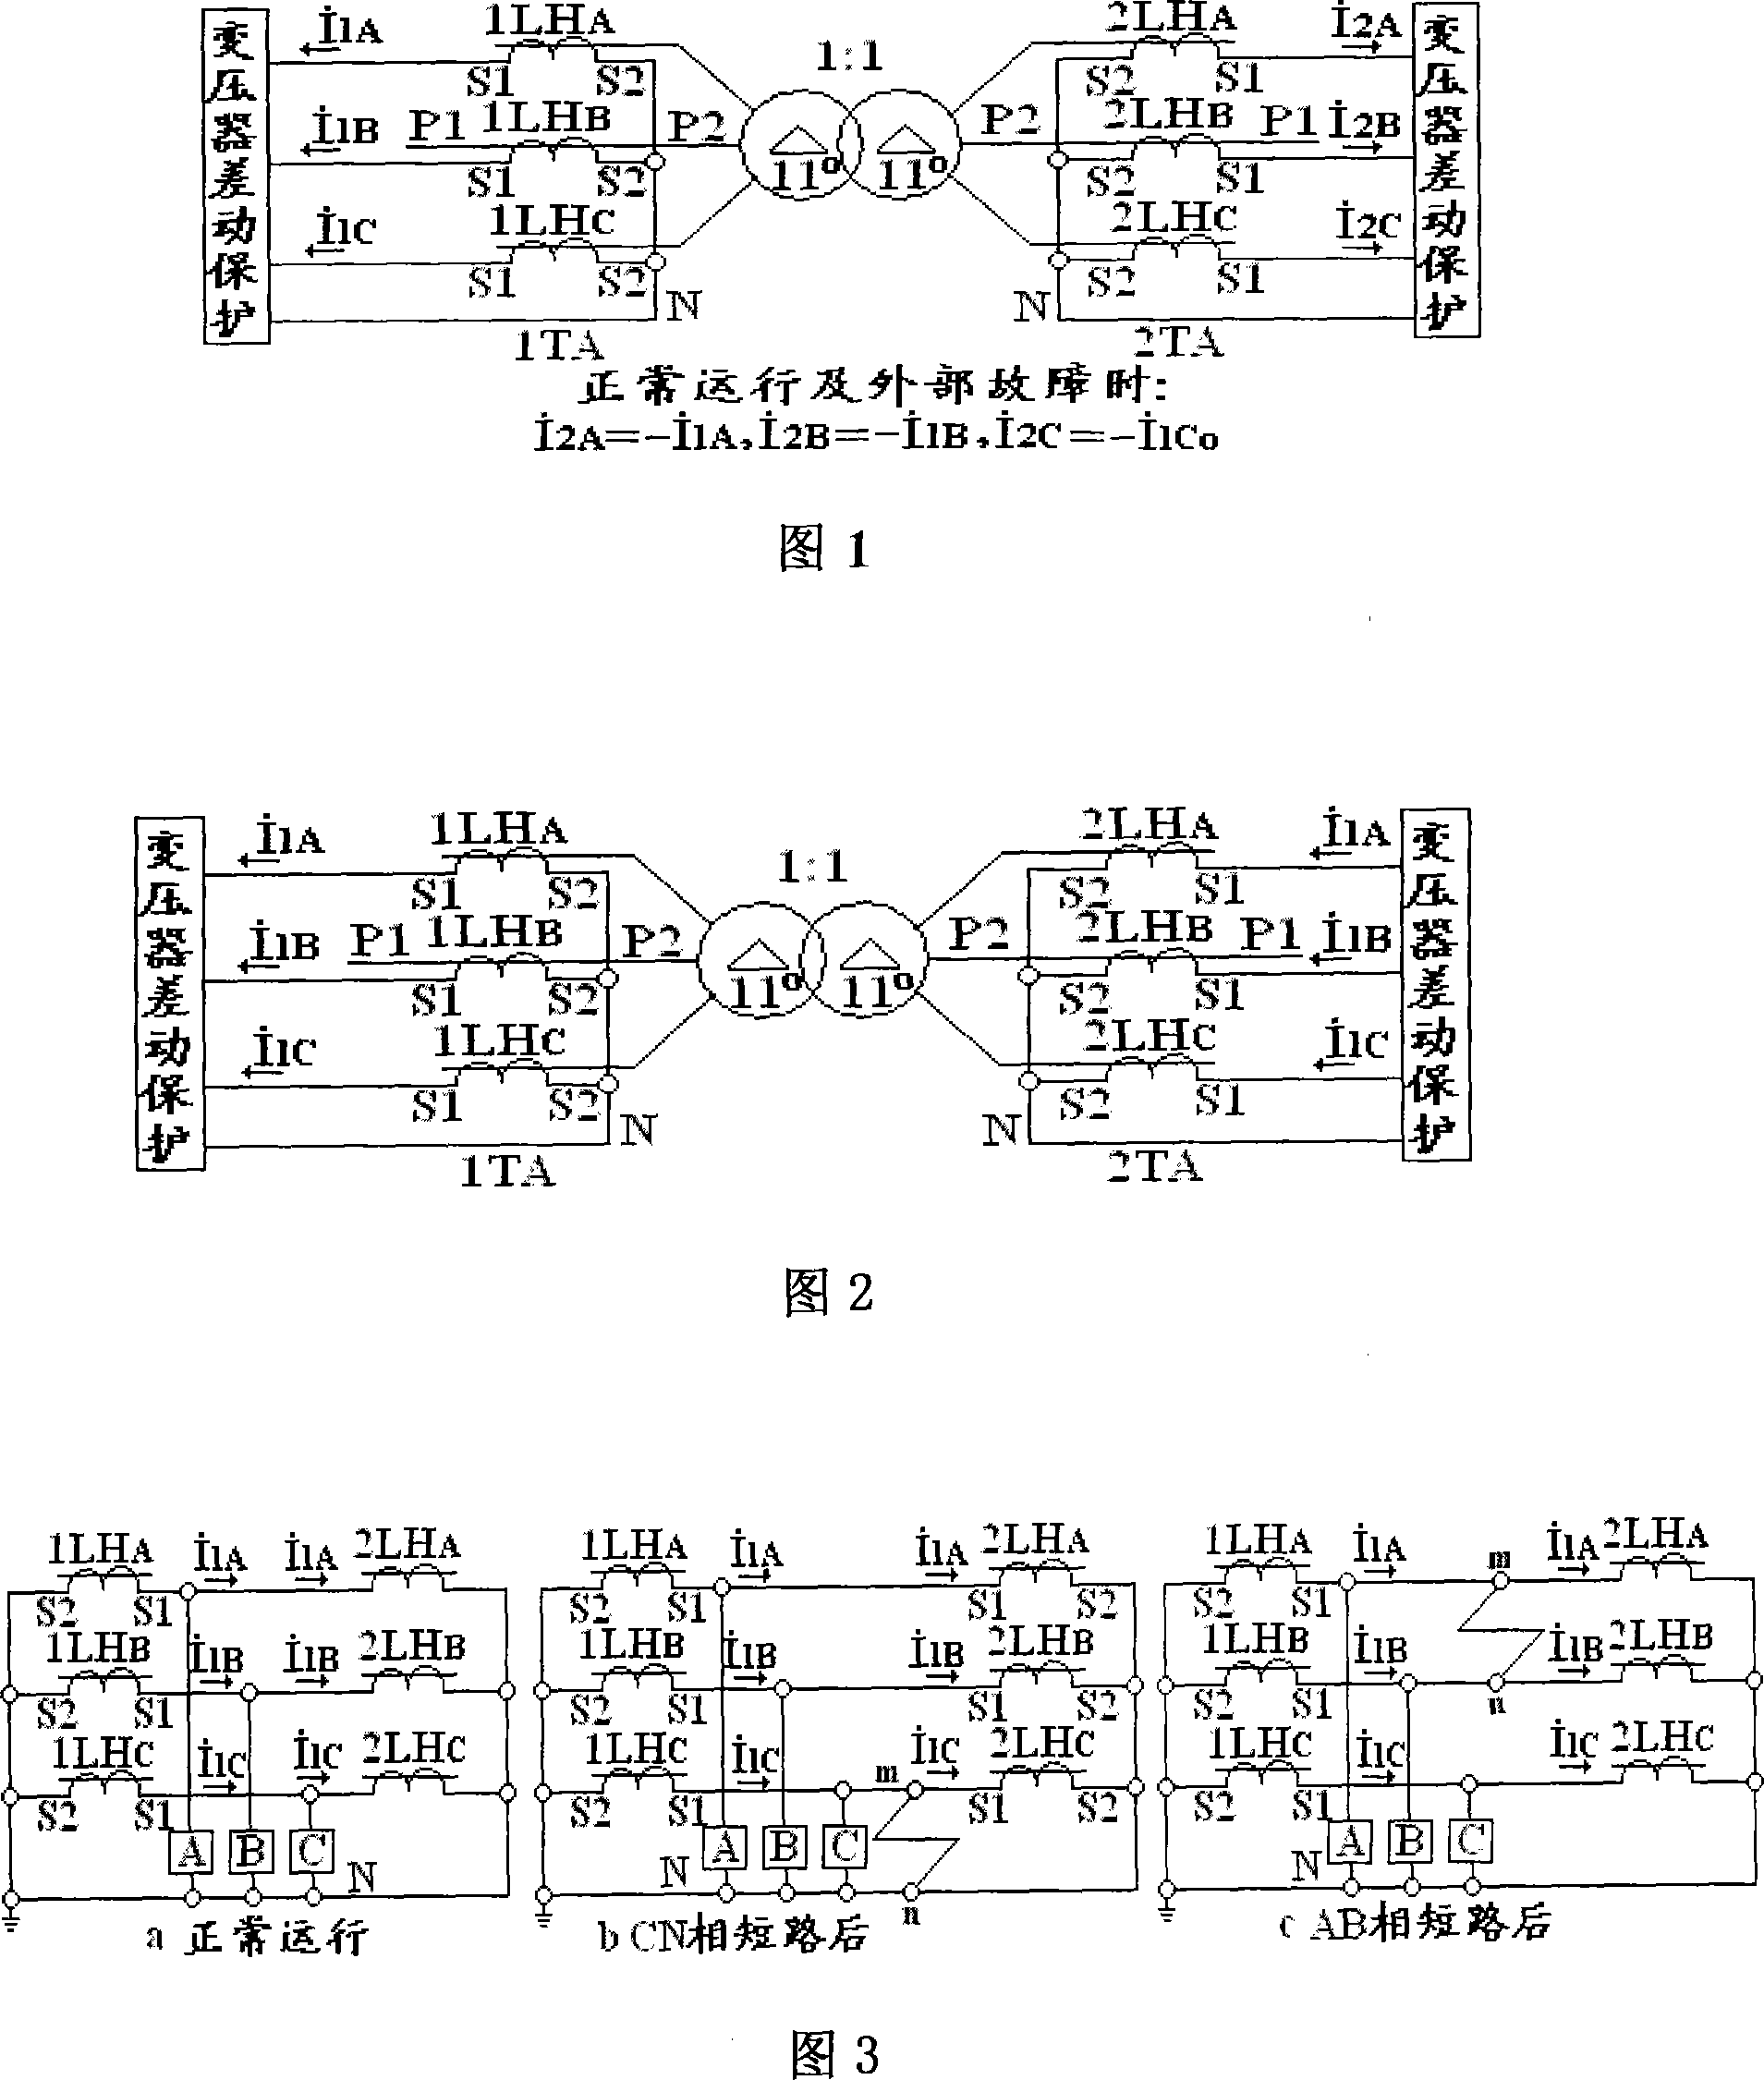 Judgement procedure for digital transformer differential protection to prevent TA secondary circuit failure from leading to mistaken operation